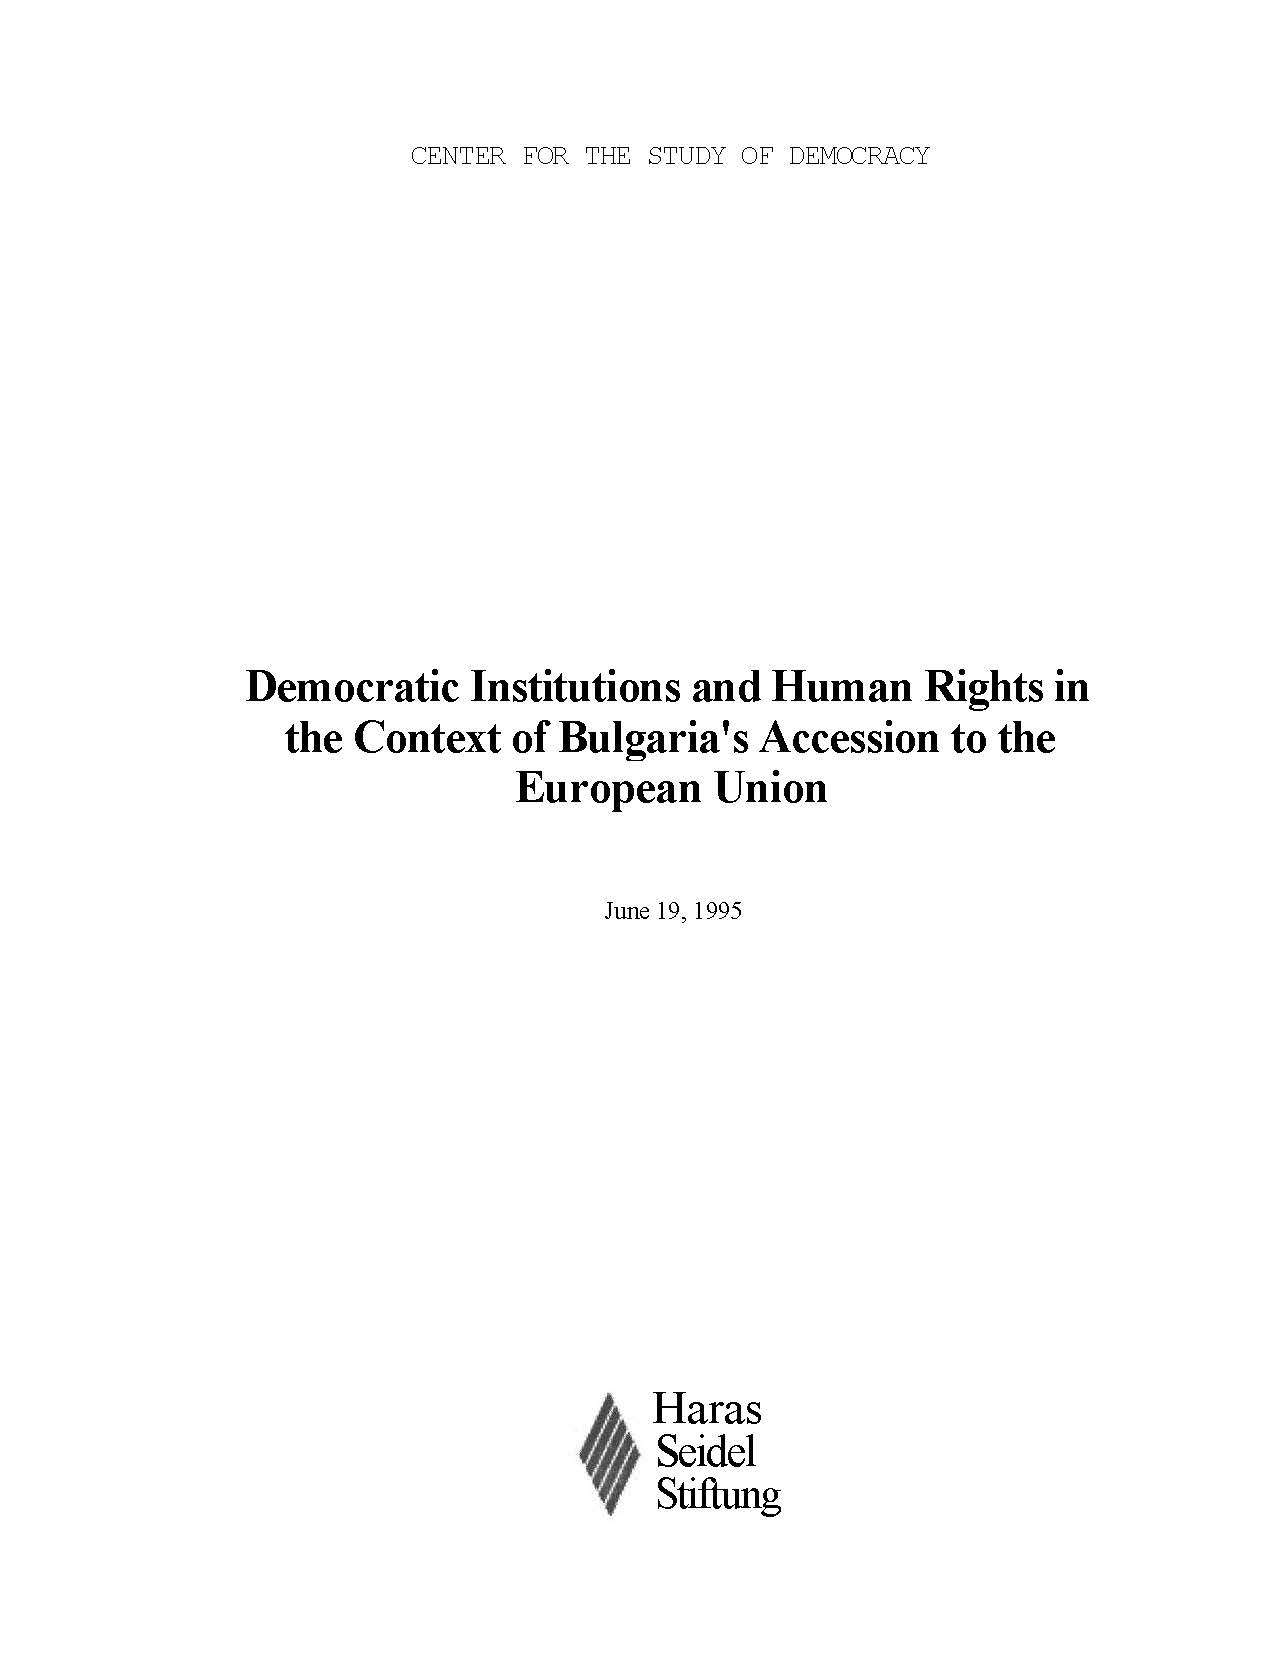 Democratic Institutions and Human Rights in the Context of Bulgaria's Accession to the European Union